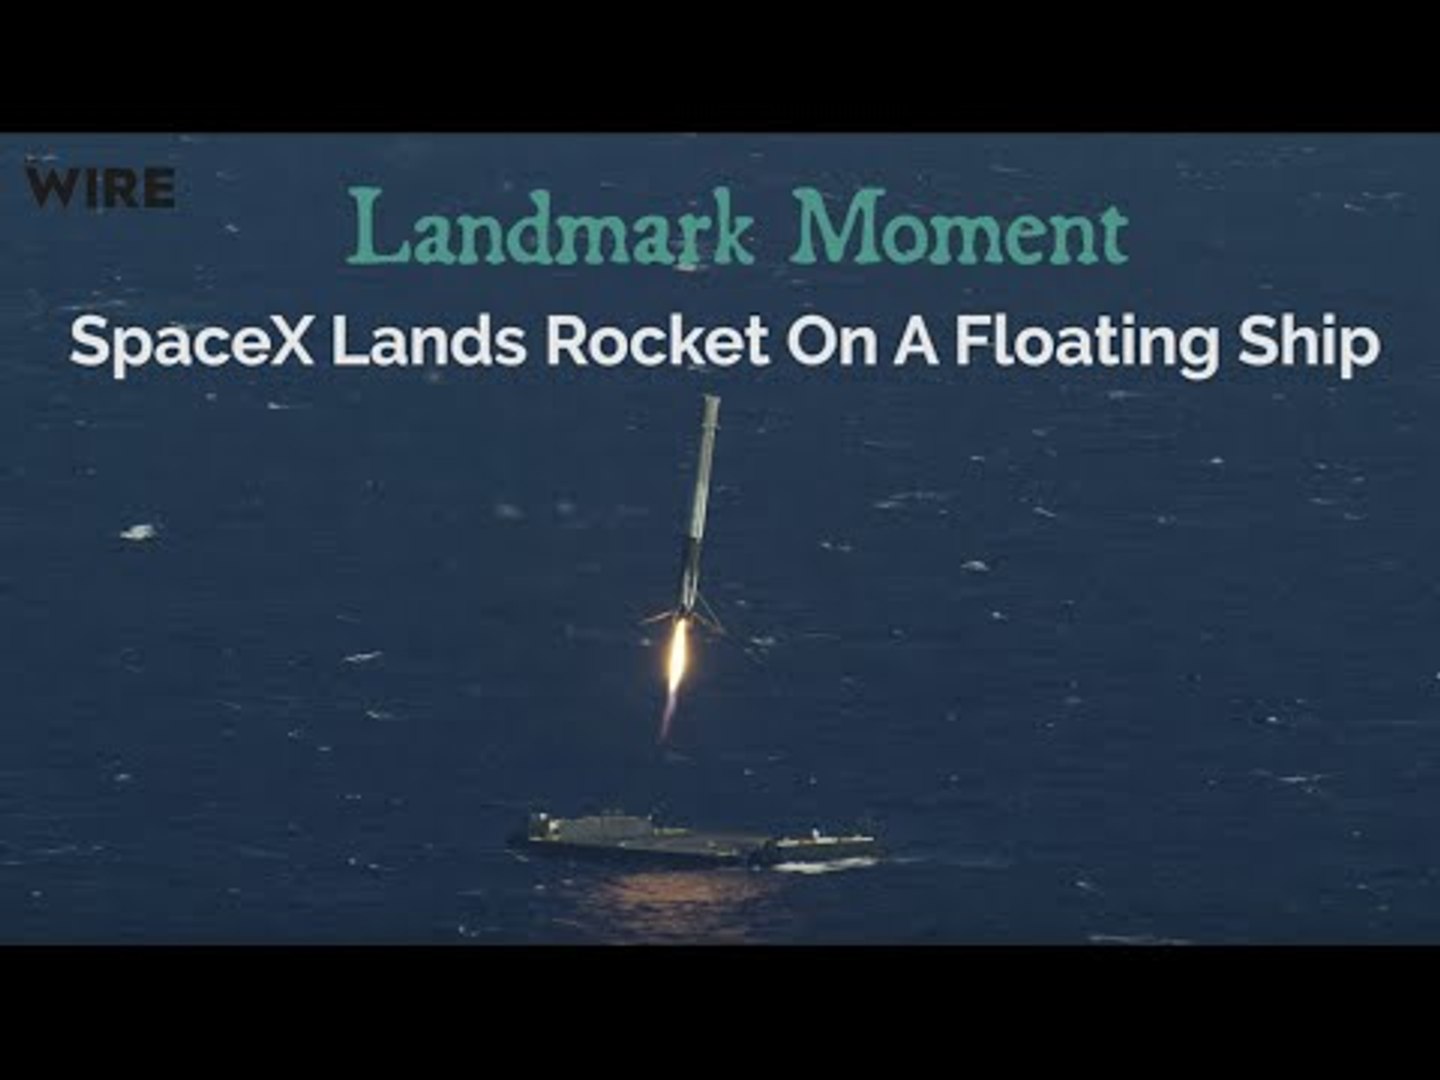 SpaceX Lands Rocket On A Floating Ship